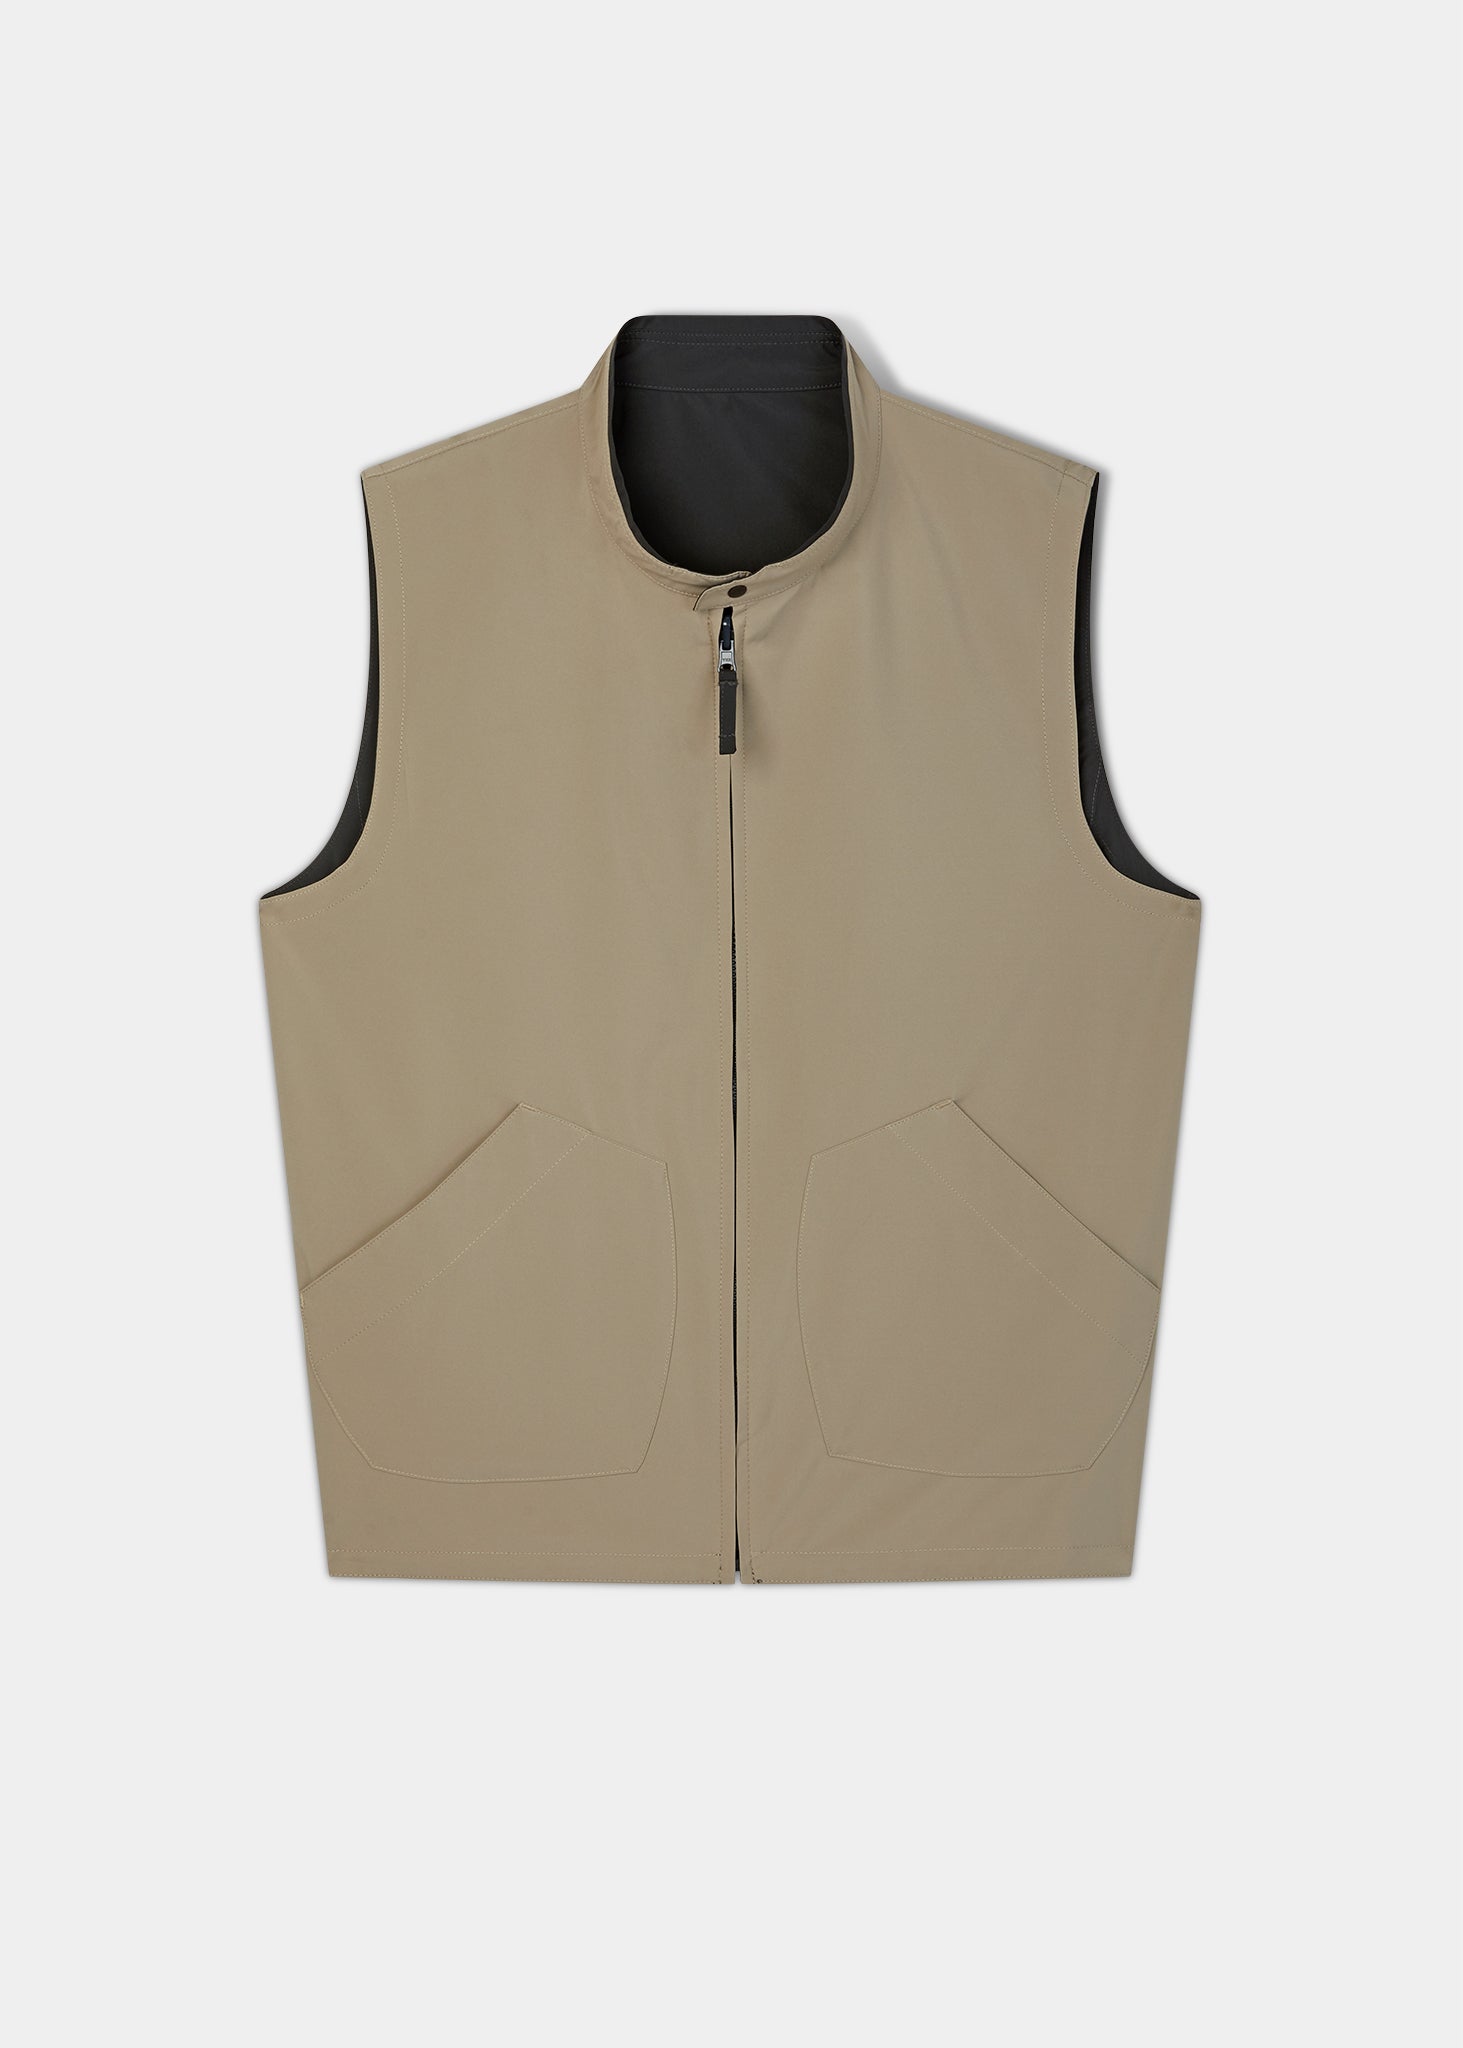 Lettoch Reversible Lightweight Summer Gilet In Khaki and Beige